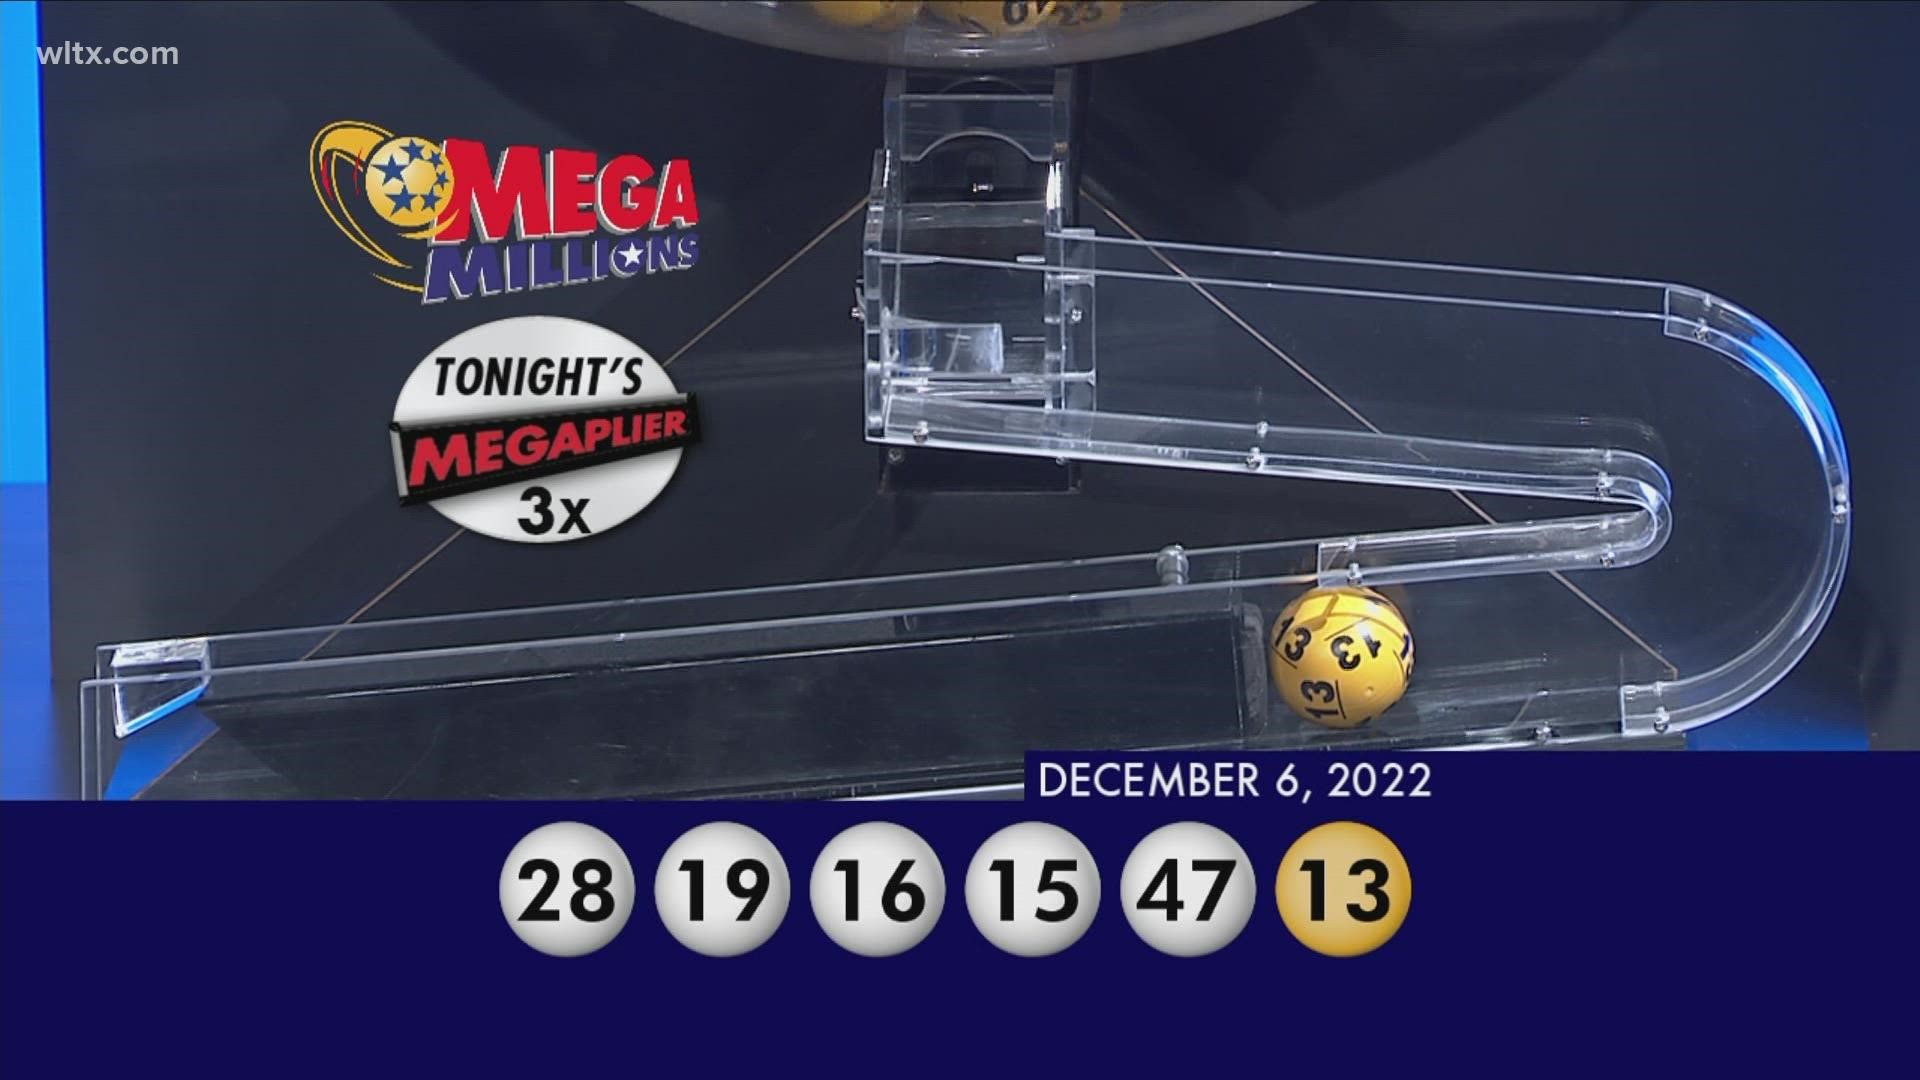 Here are the winning numbers for MegaMillions for December 6, 2022.